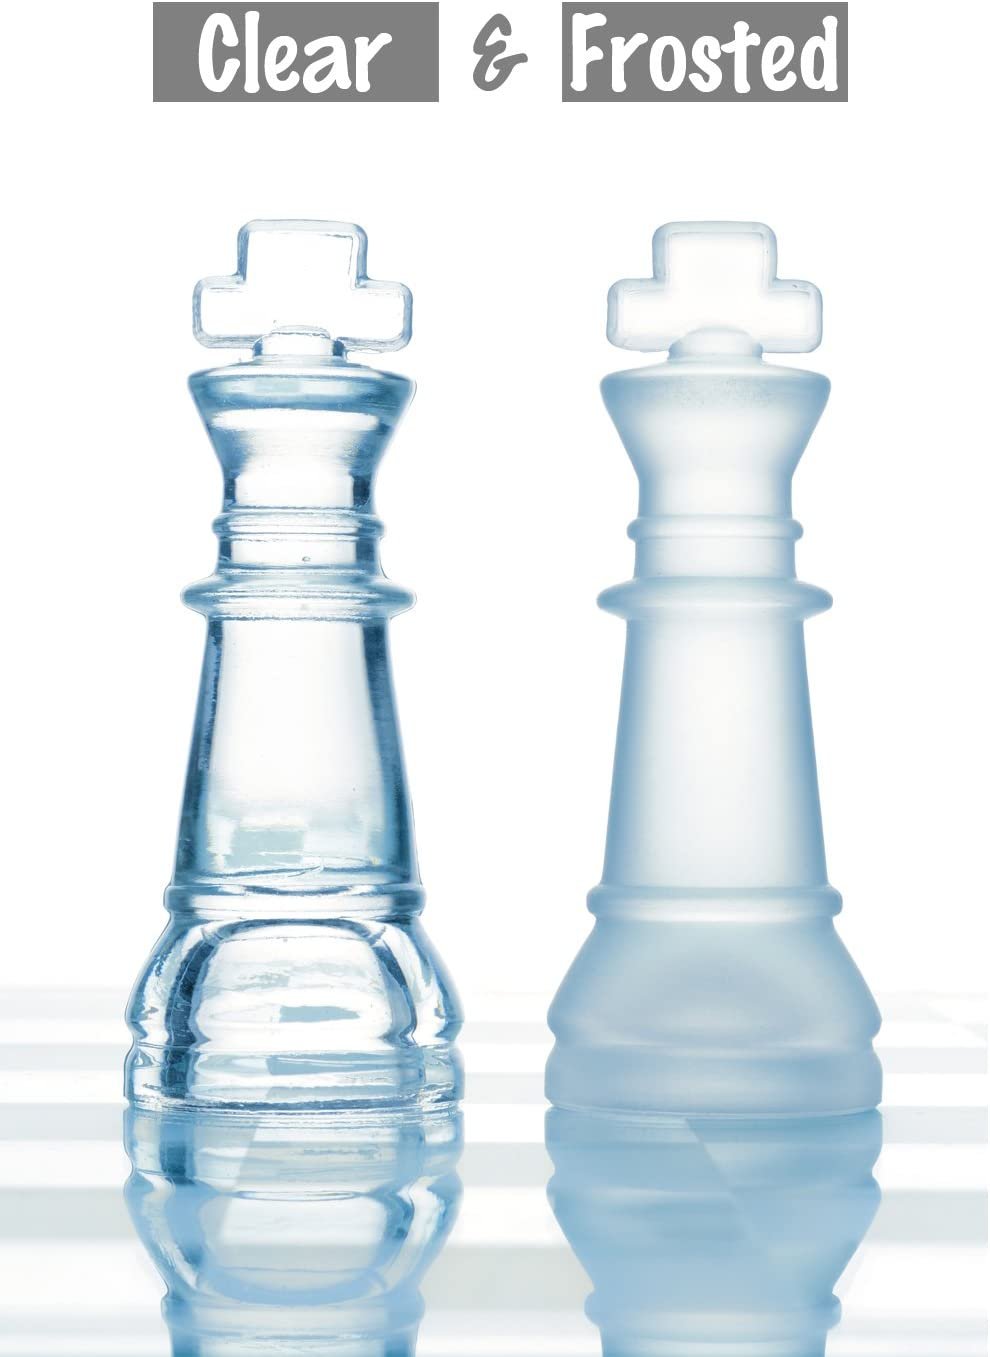 Gamie Glass Chess Set, Elegant Design - Durable Build - Fully Functional - 32 Frosted and Clear Pieces - Felted Bottoms - Easy to Carry - Reassuringly Stable (10")